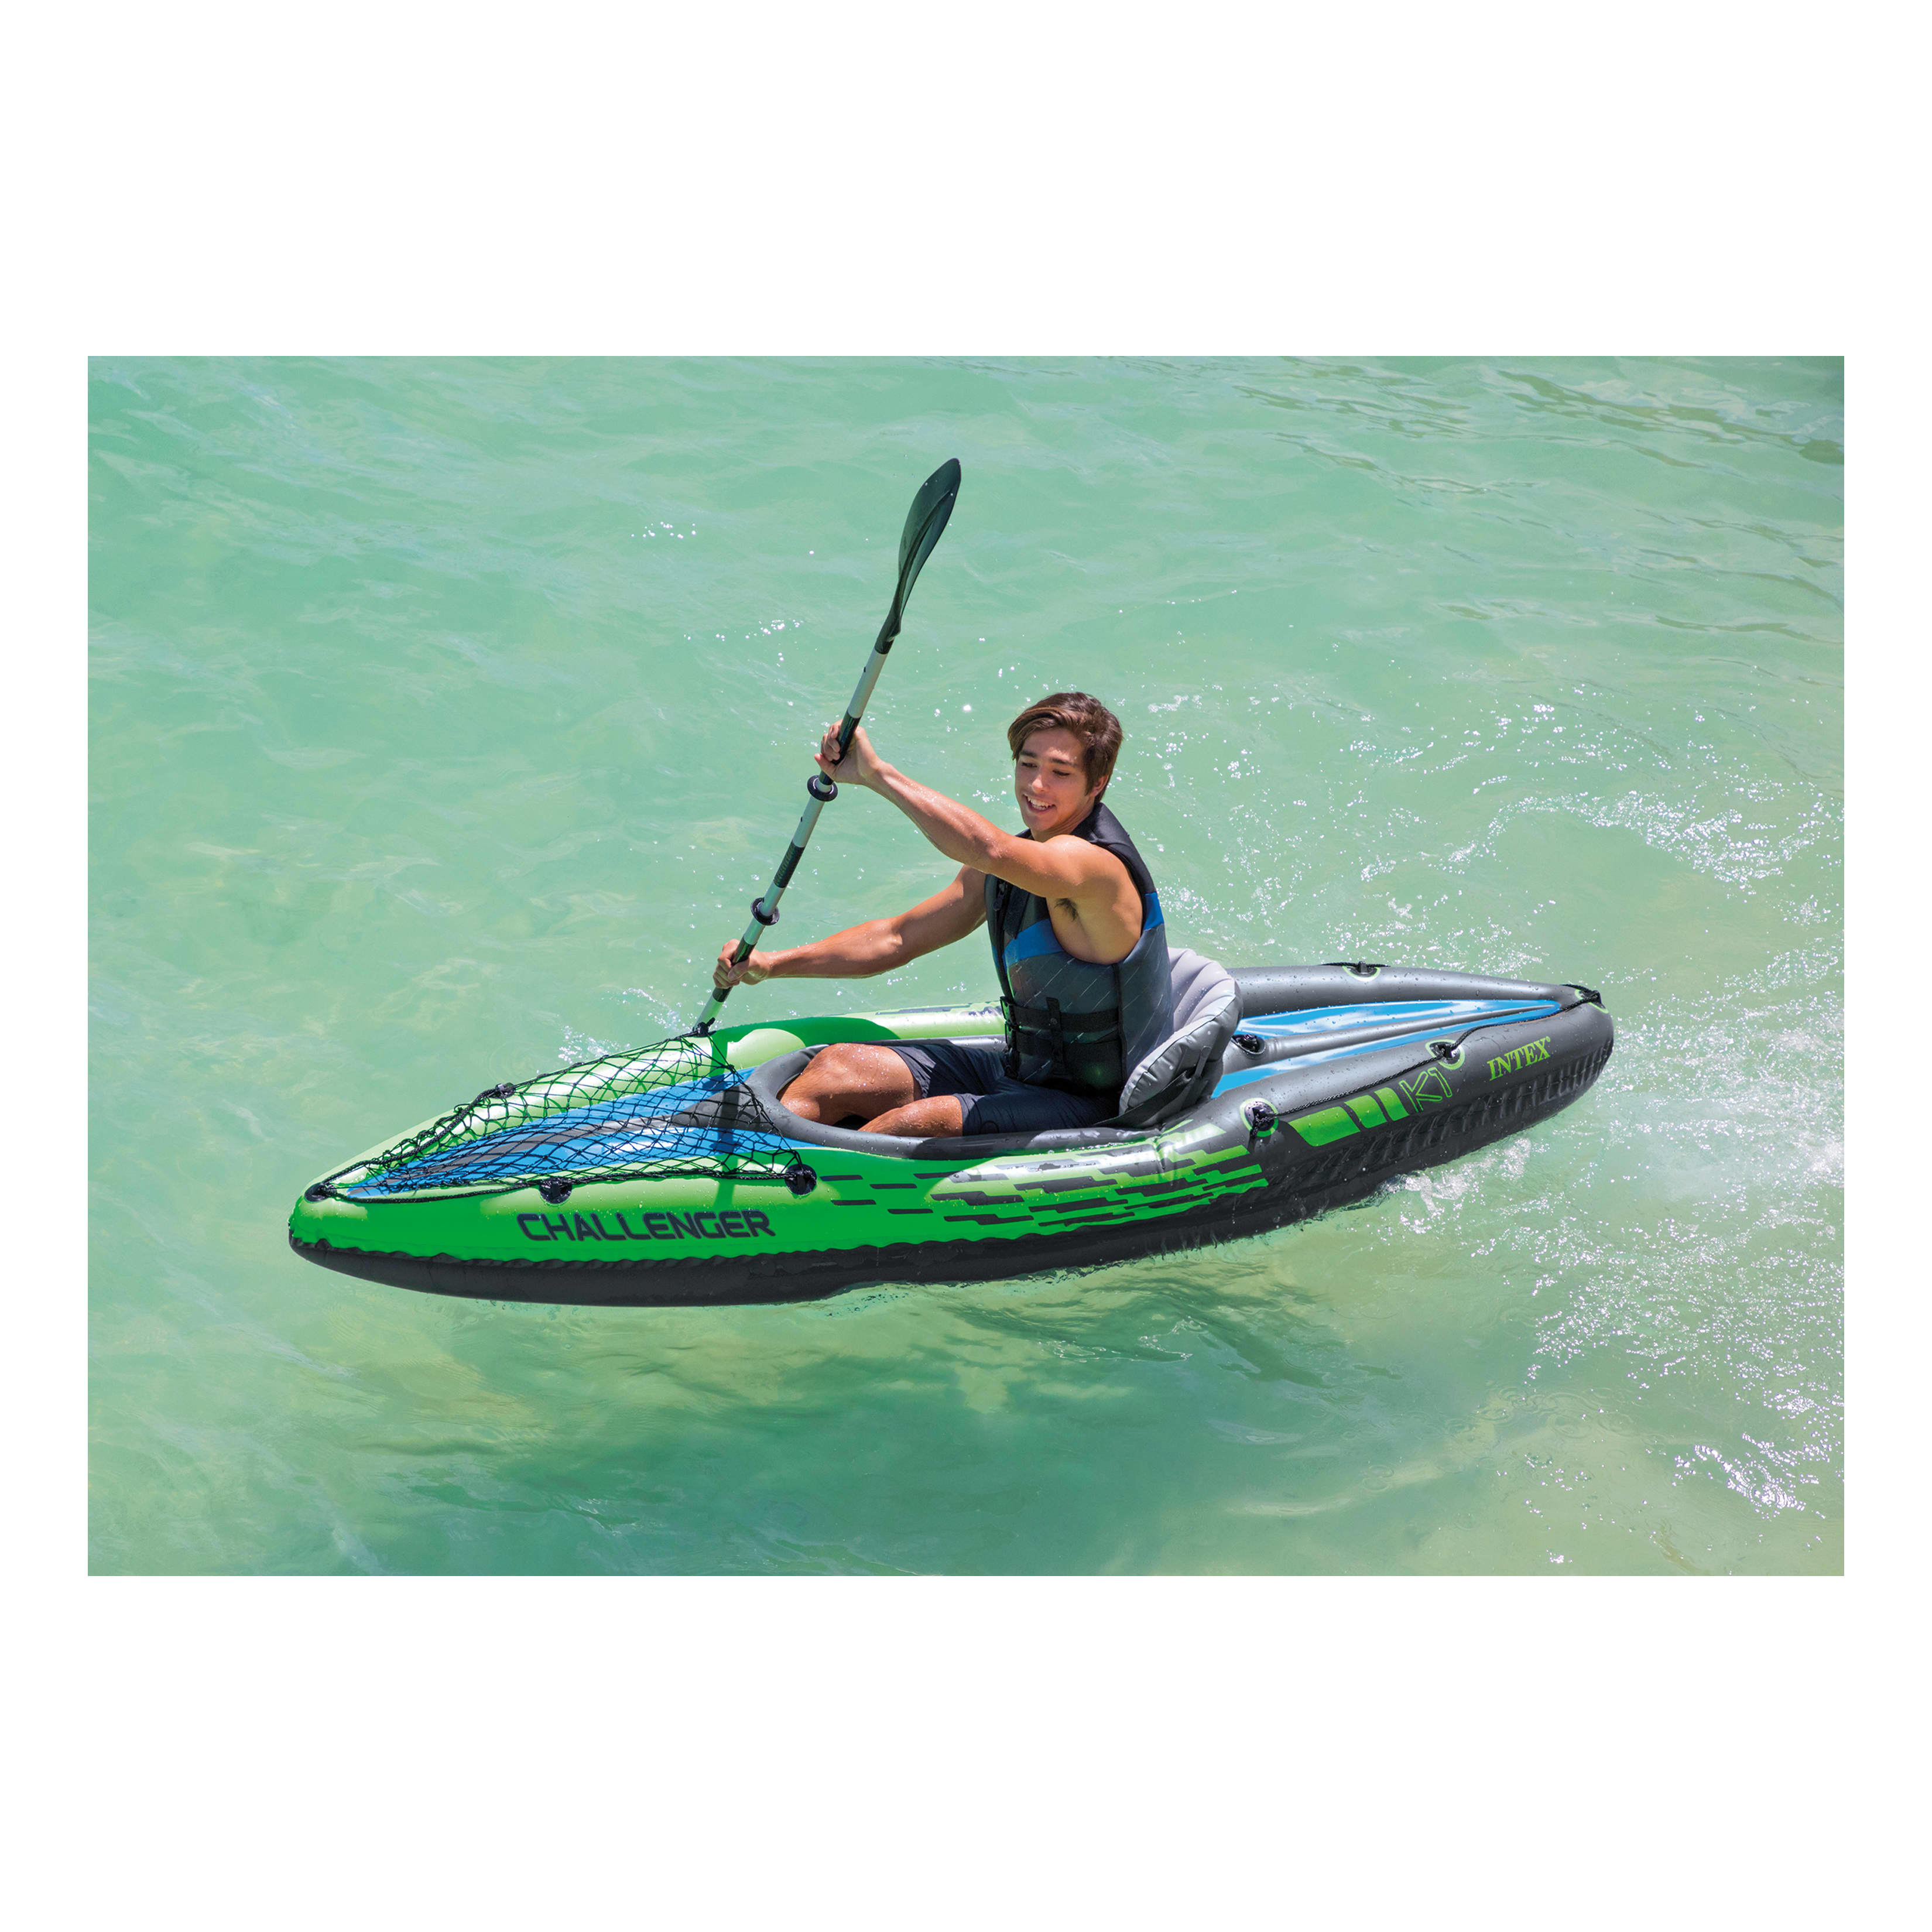 Intex Challenger K1 Inflatable Single Person Kayak Set and Accessory Kit w/  Pump